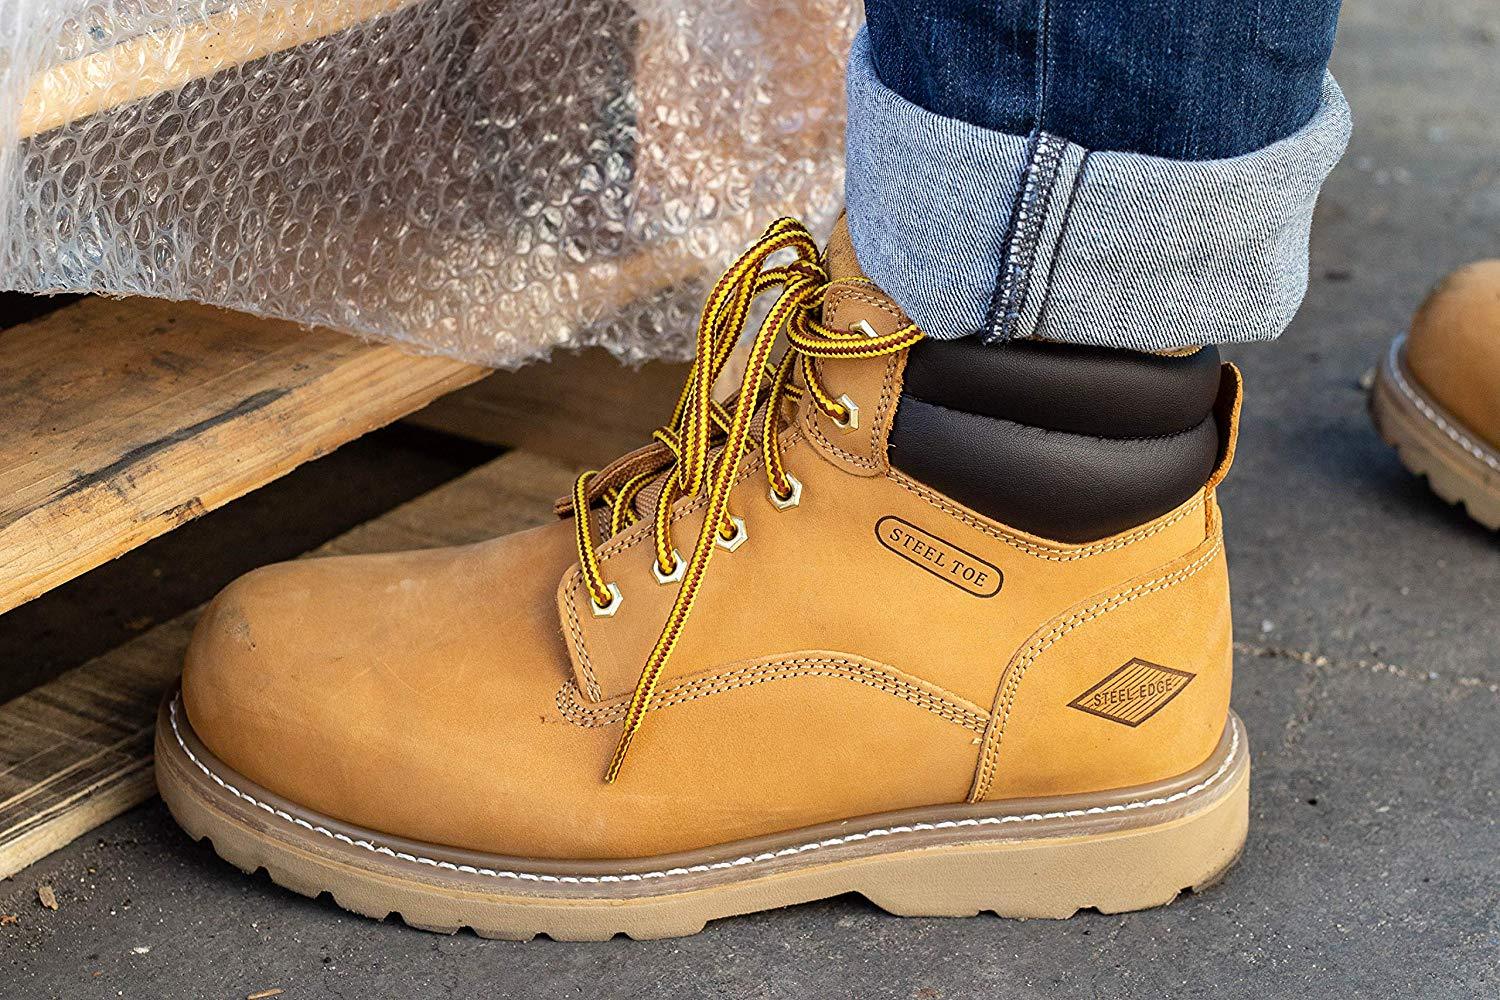 Indestructible Boots for Men - By 